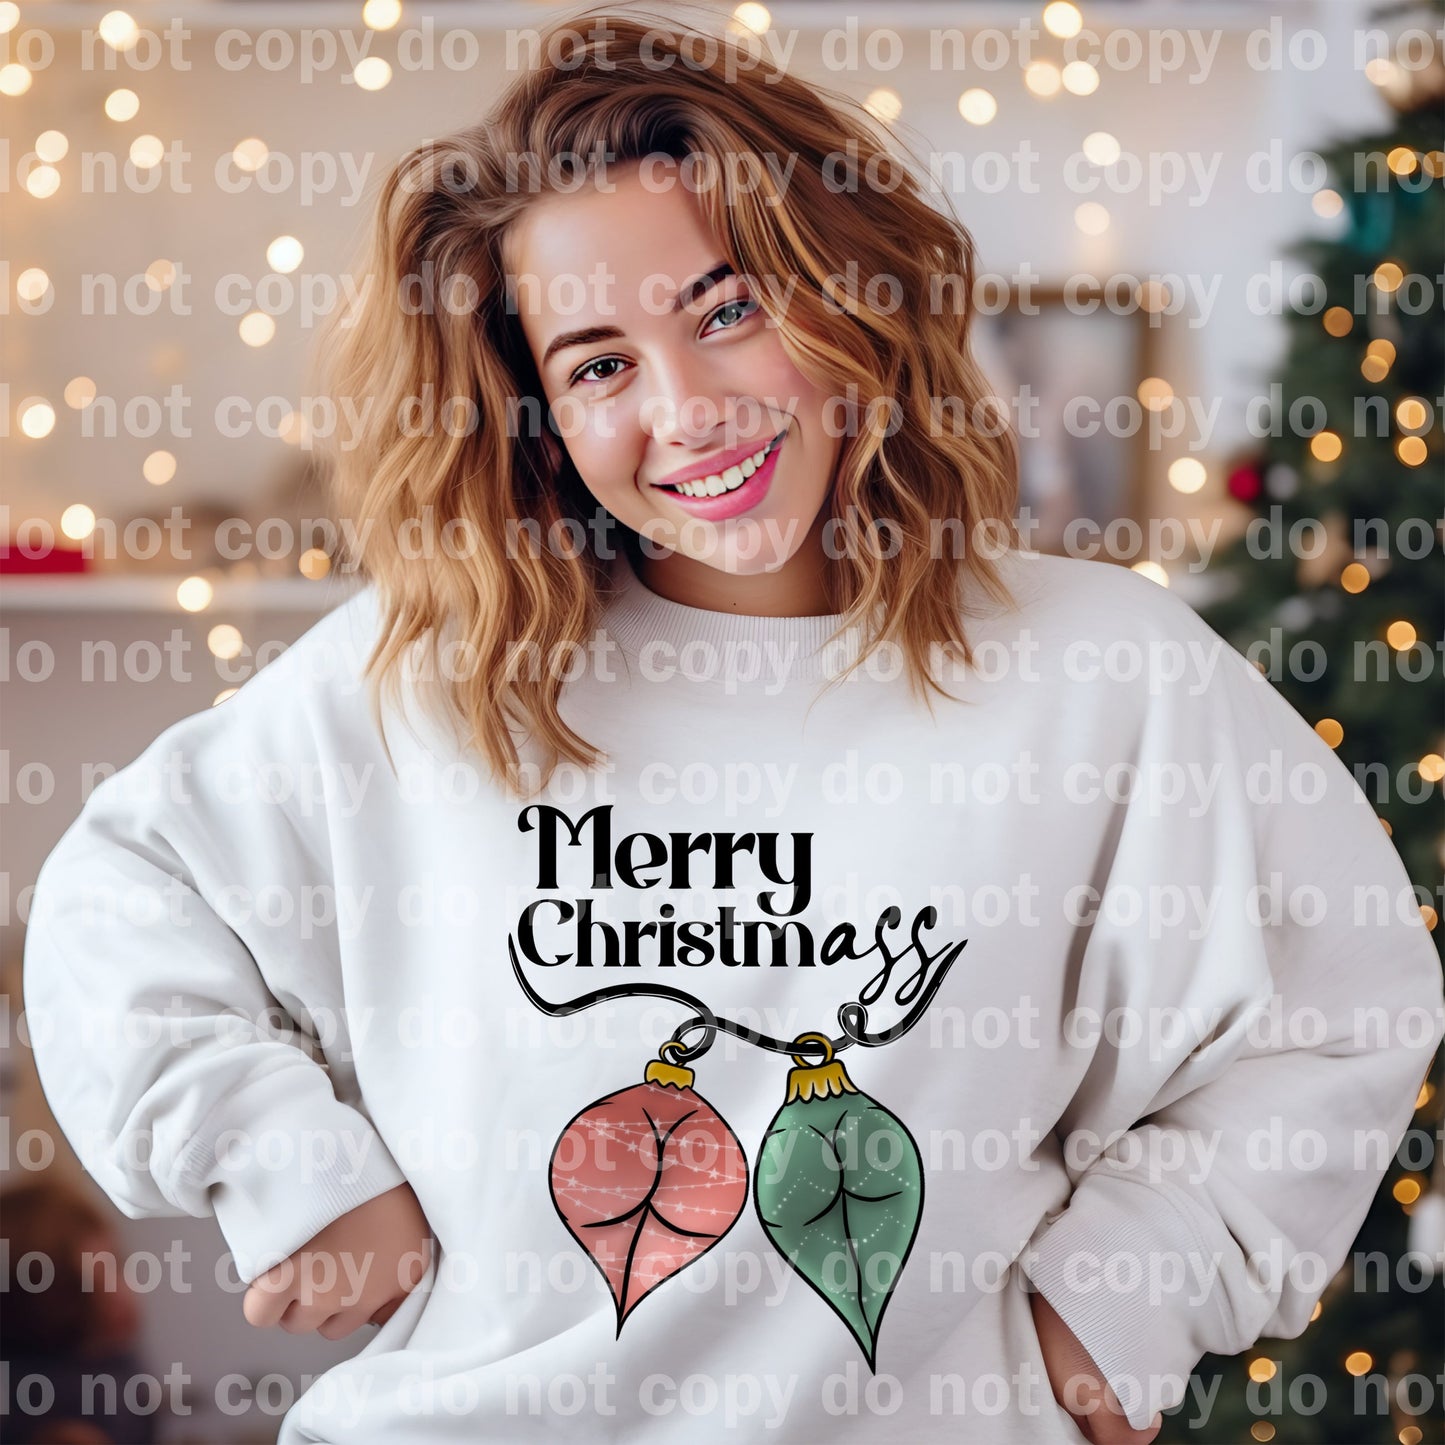 Merry Christmass Ass Bulb with Optional Sleeve Design Dream Print or Sublimation Print